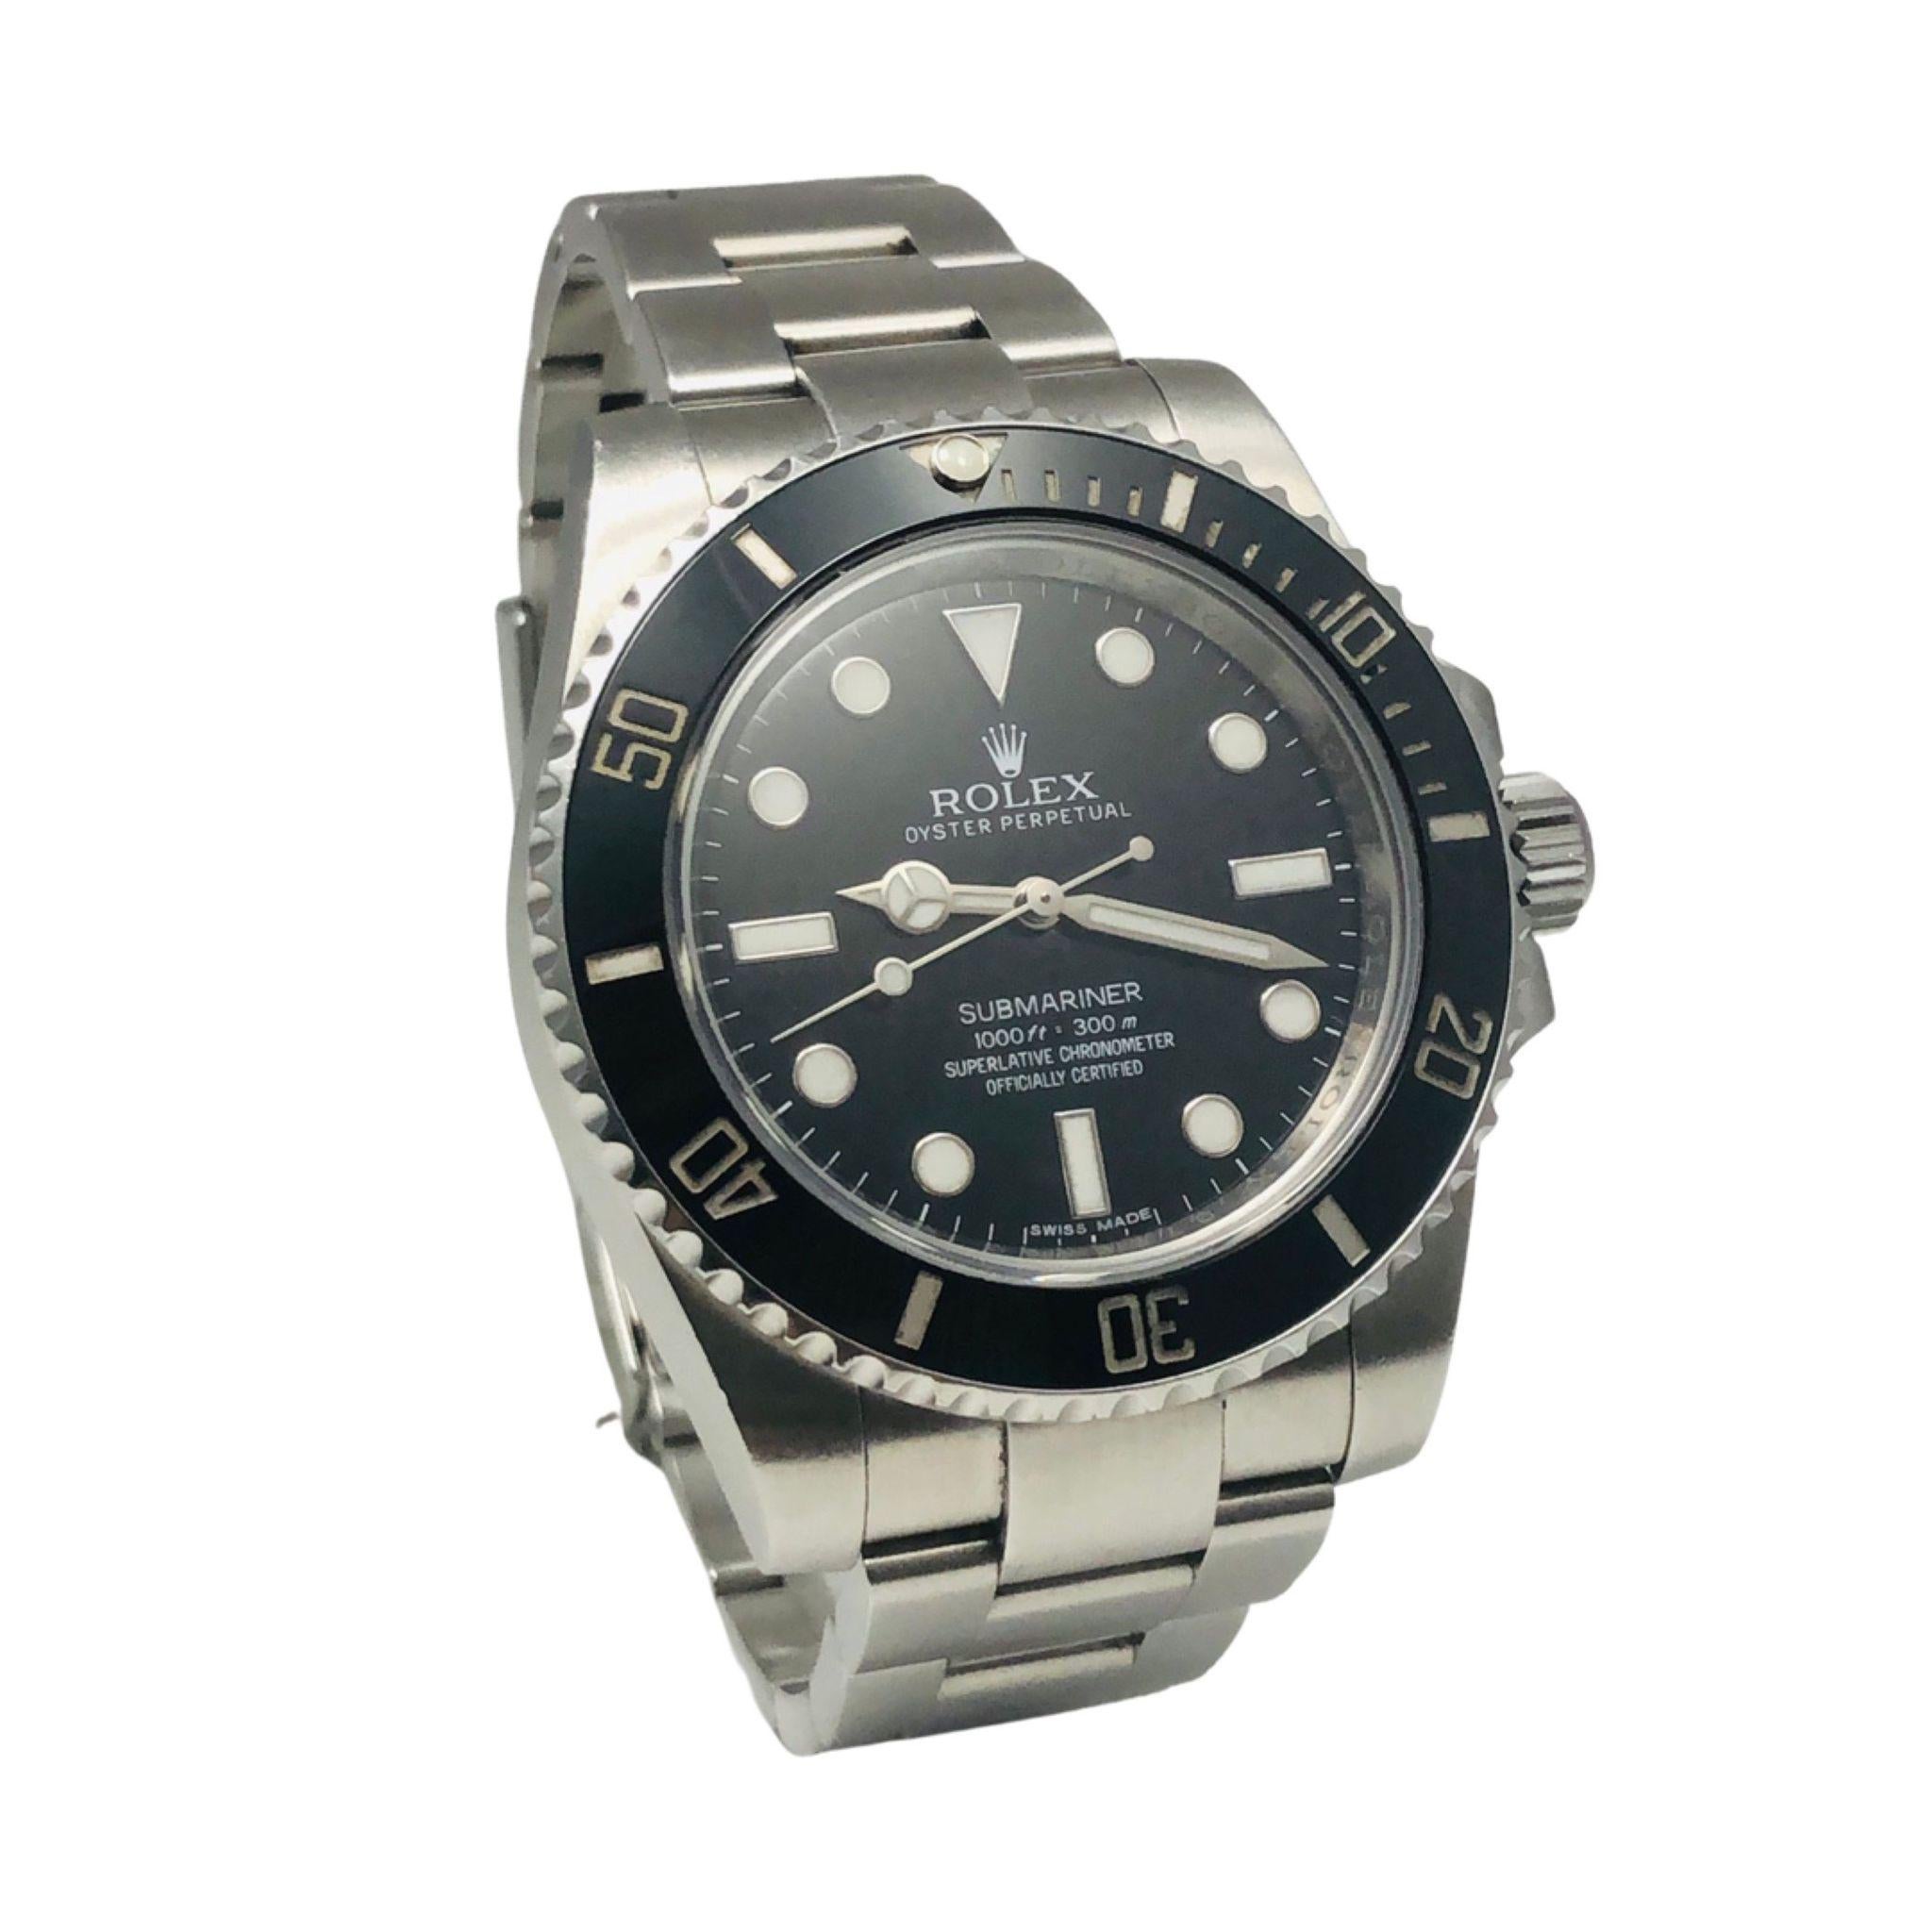 Rolex Submariner 'No Date' Stainless Steel Black Dial Ref. 114060 In Good Condition For Sale In Miami, FL